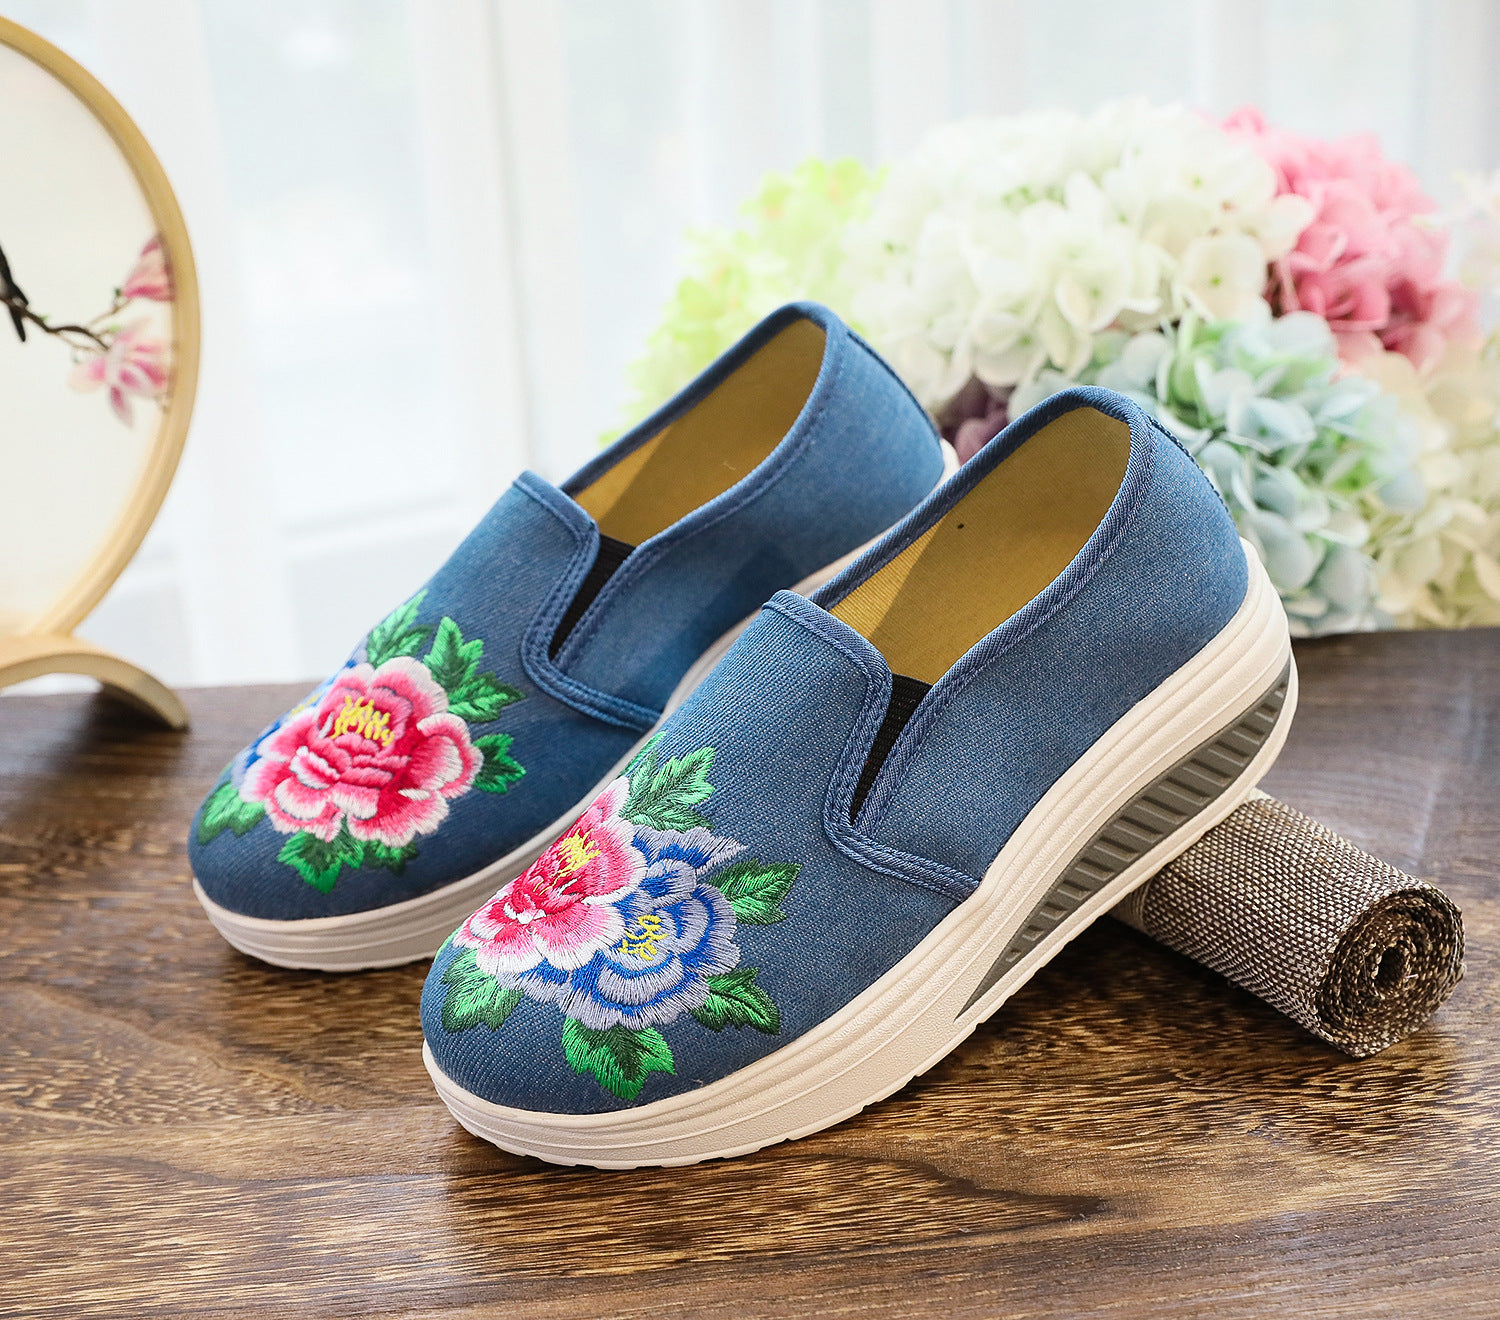 Classic New Stylish Rocking Slip-on Embroidered Sneakers